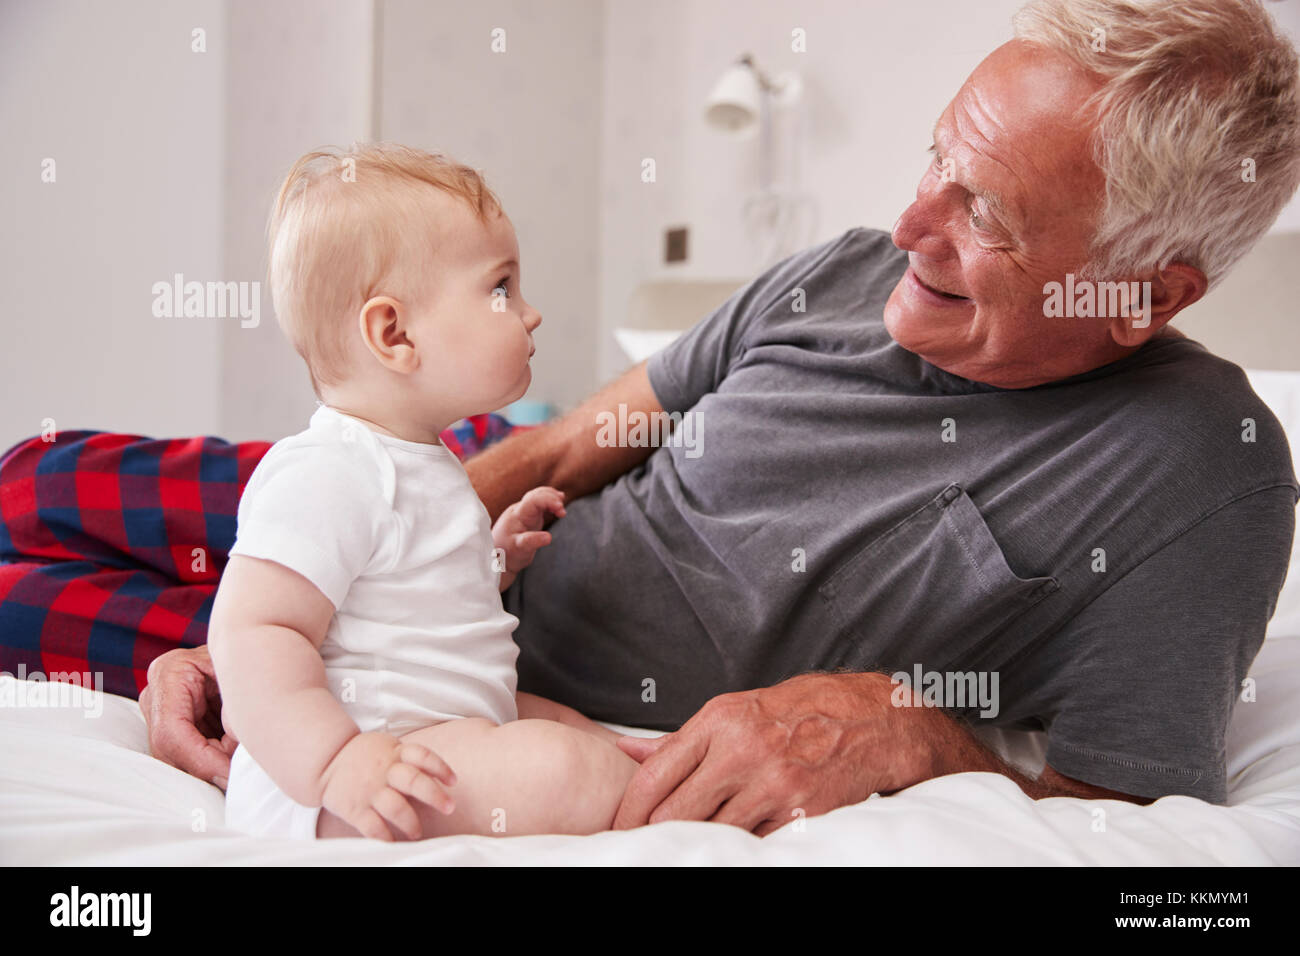 Grandfather Lying In Bed At Home Looking After Baby Grandson Stock Photo